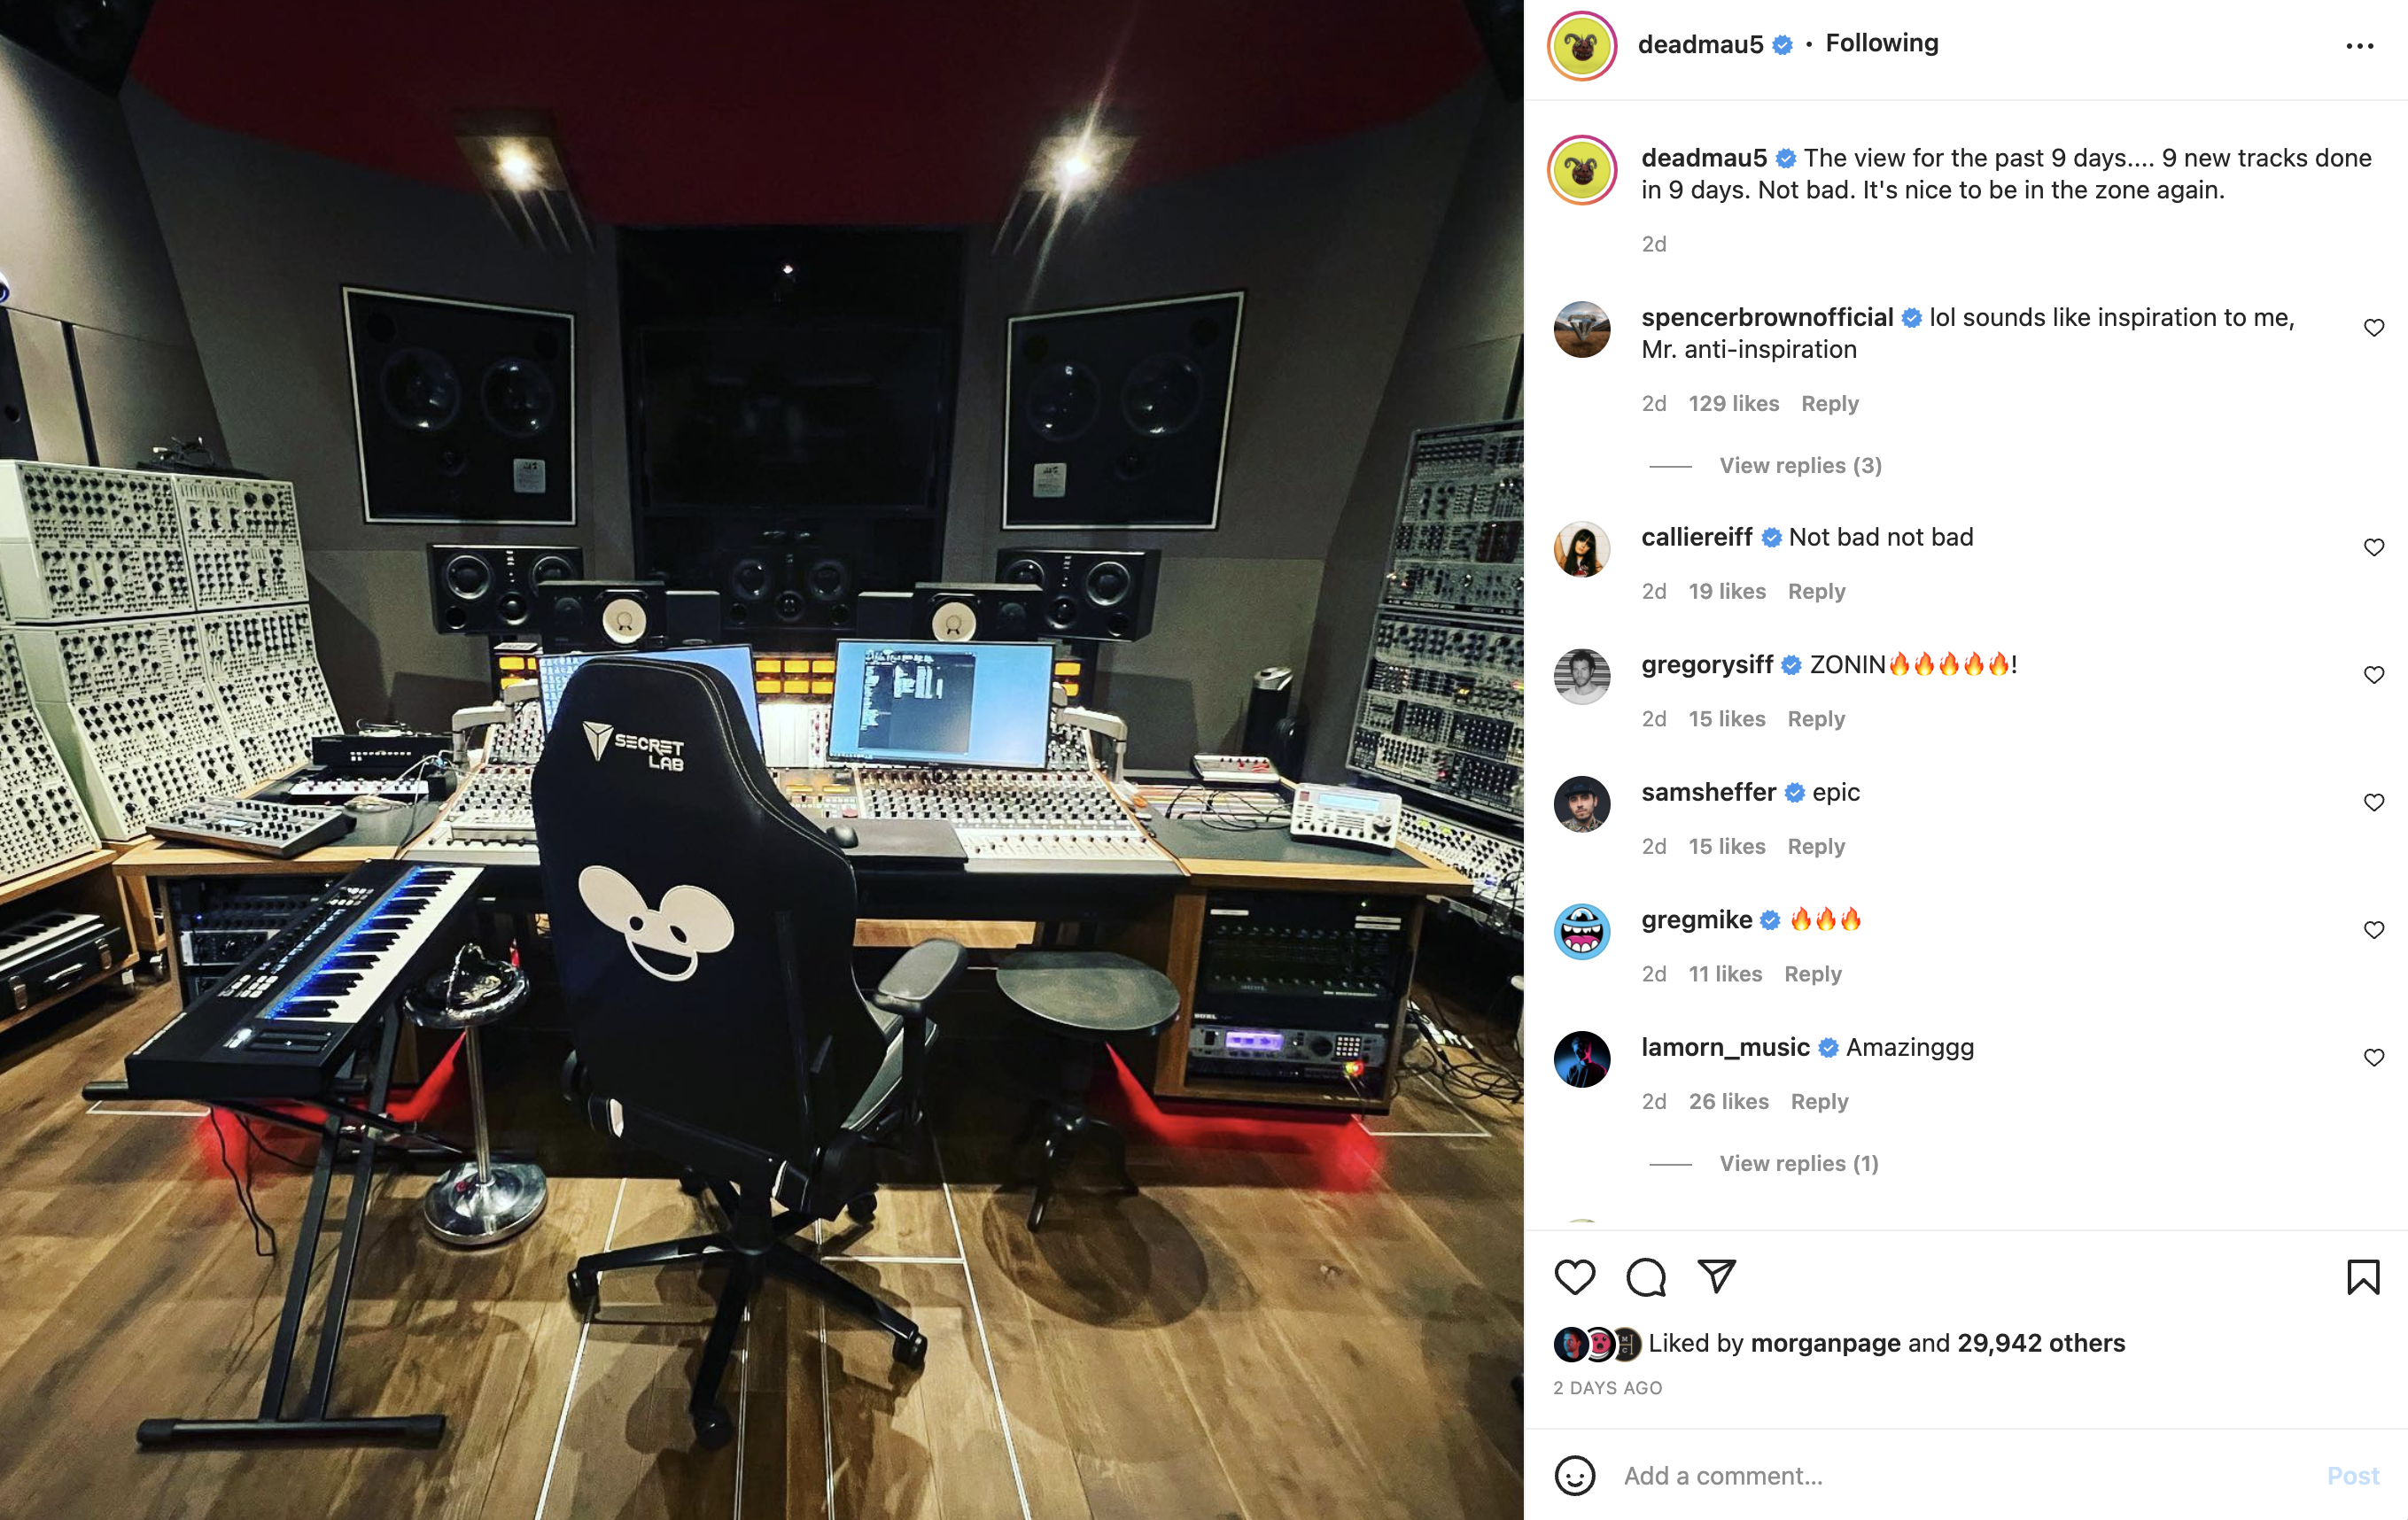 Deadmau5 Has Announced He's Created 9 New Tracks In the Last 9 Days - GDE